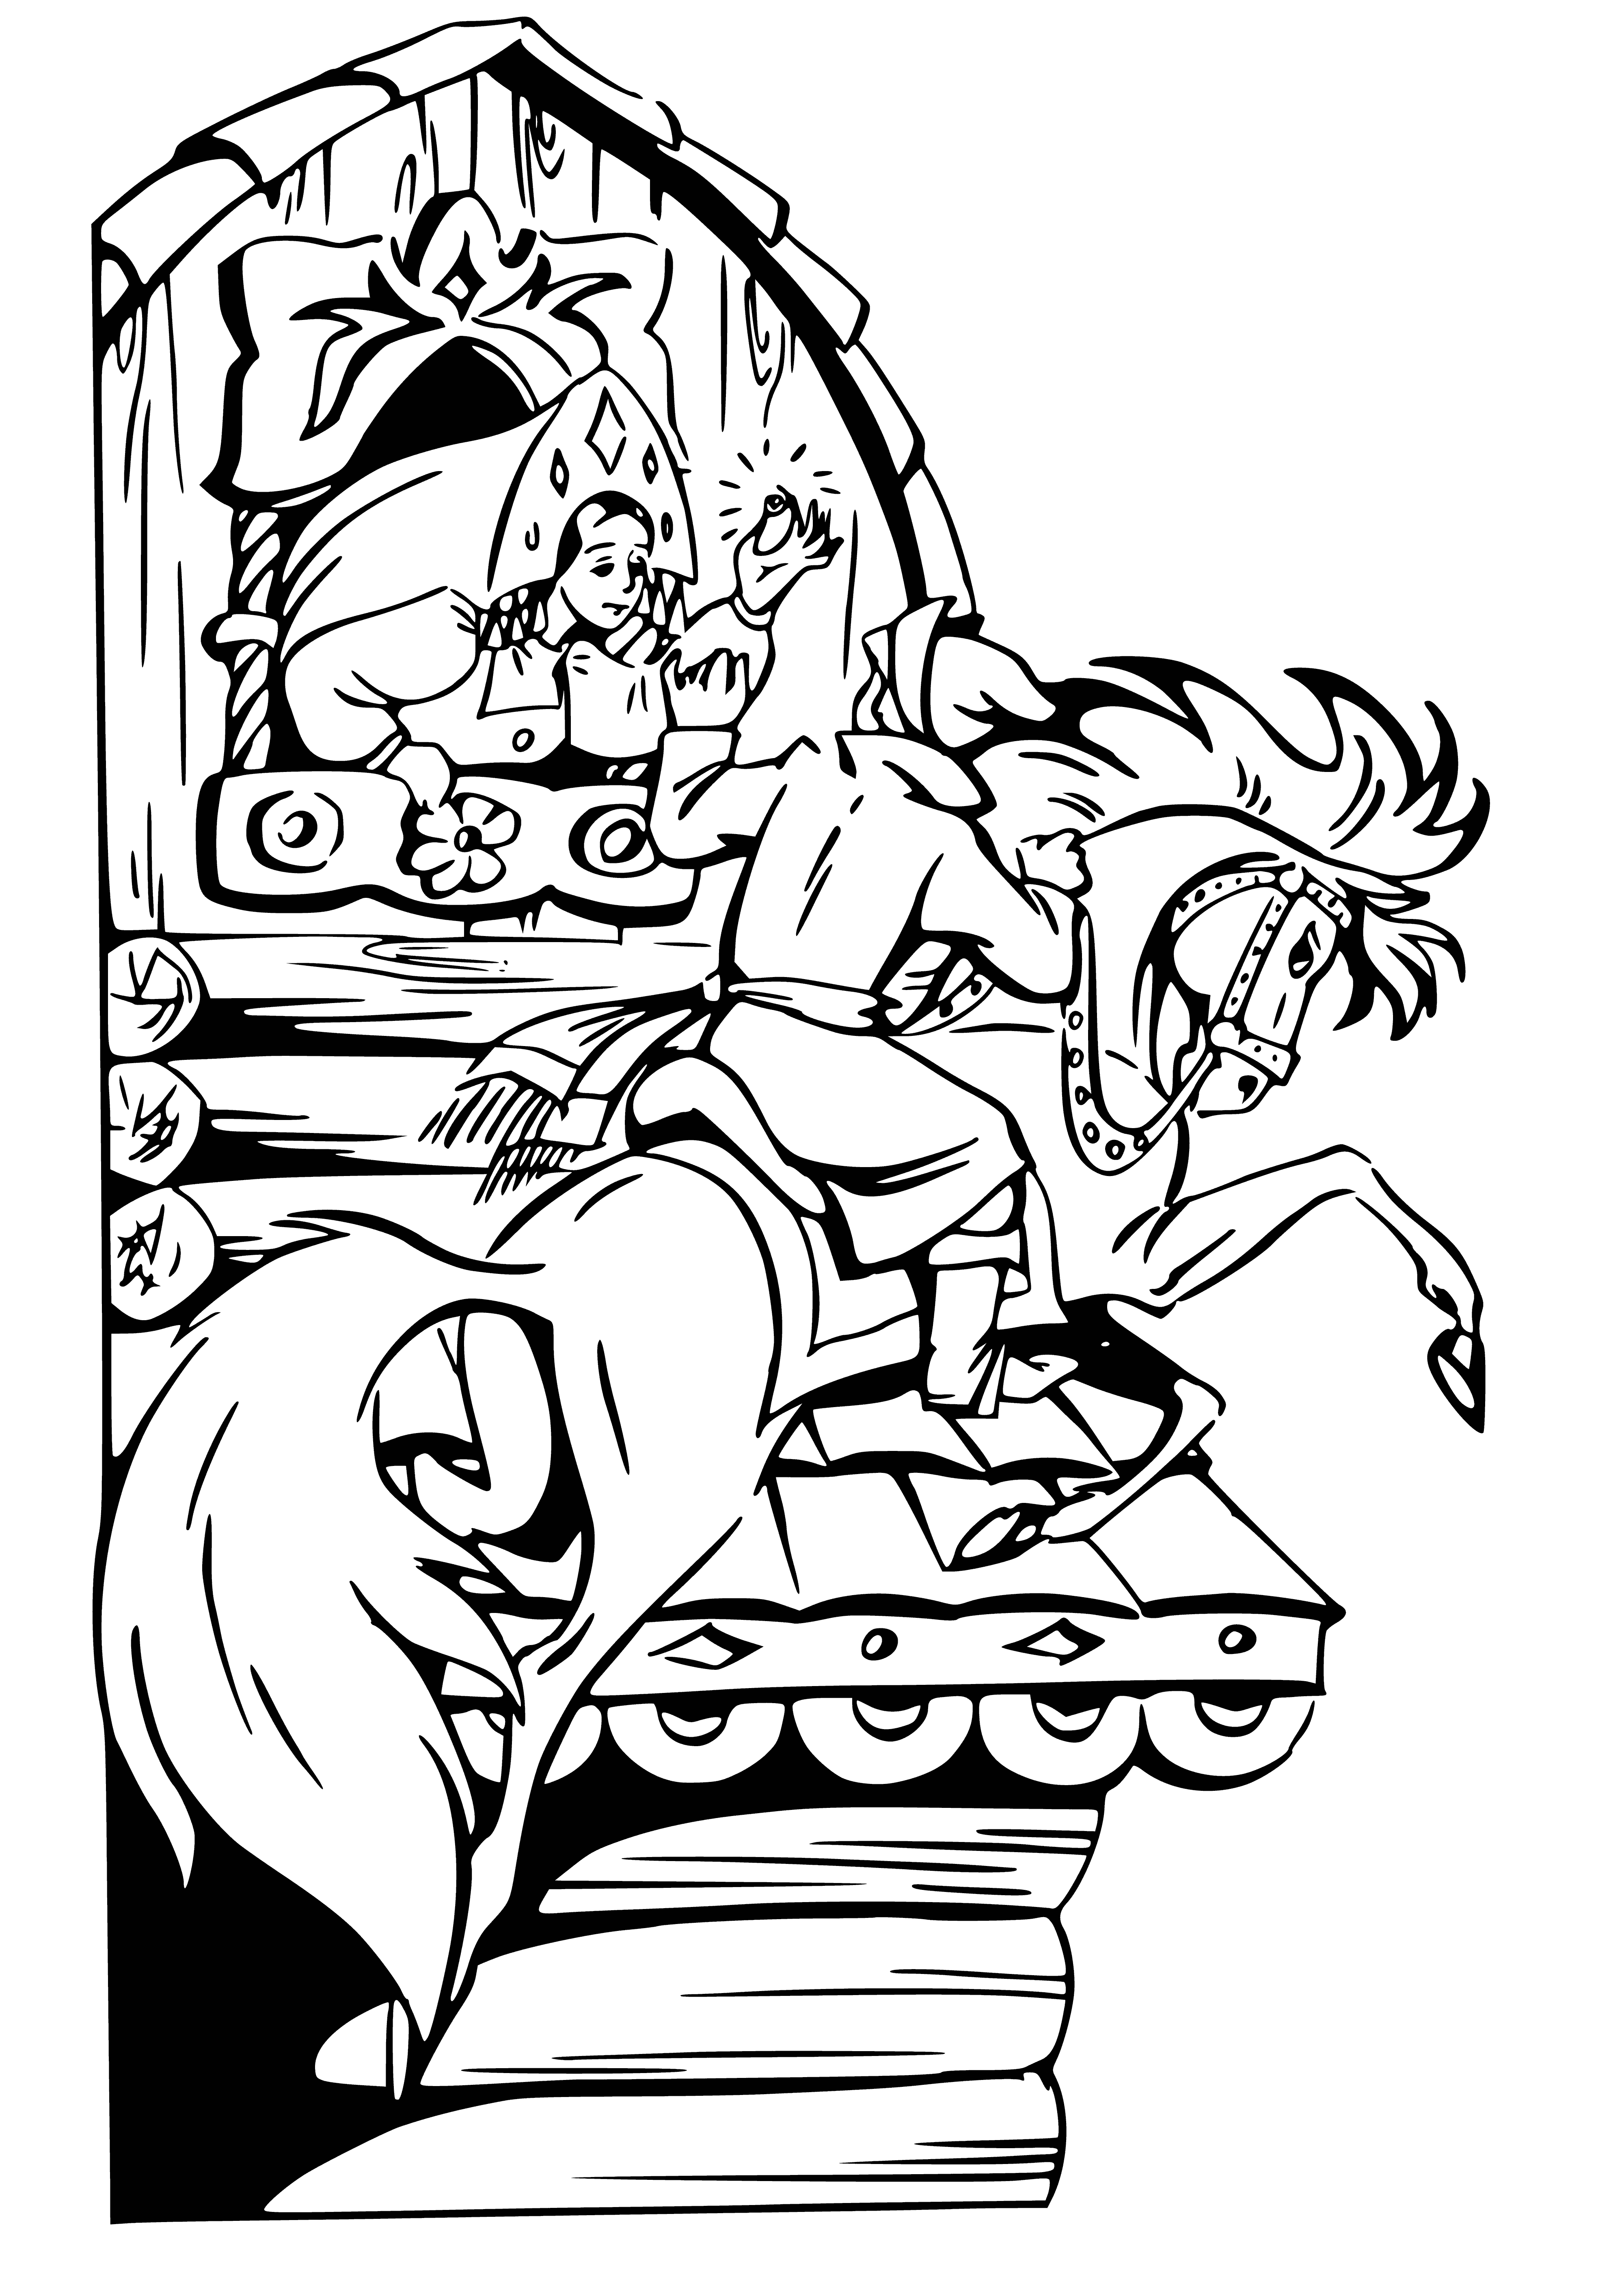 coloring page: Princess trapped in tower guarded by a dragon, snake chasing her. She needs a key to escape.